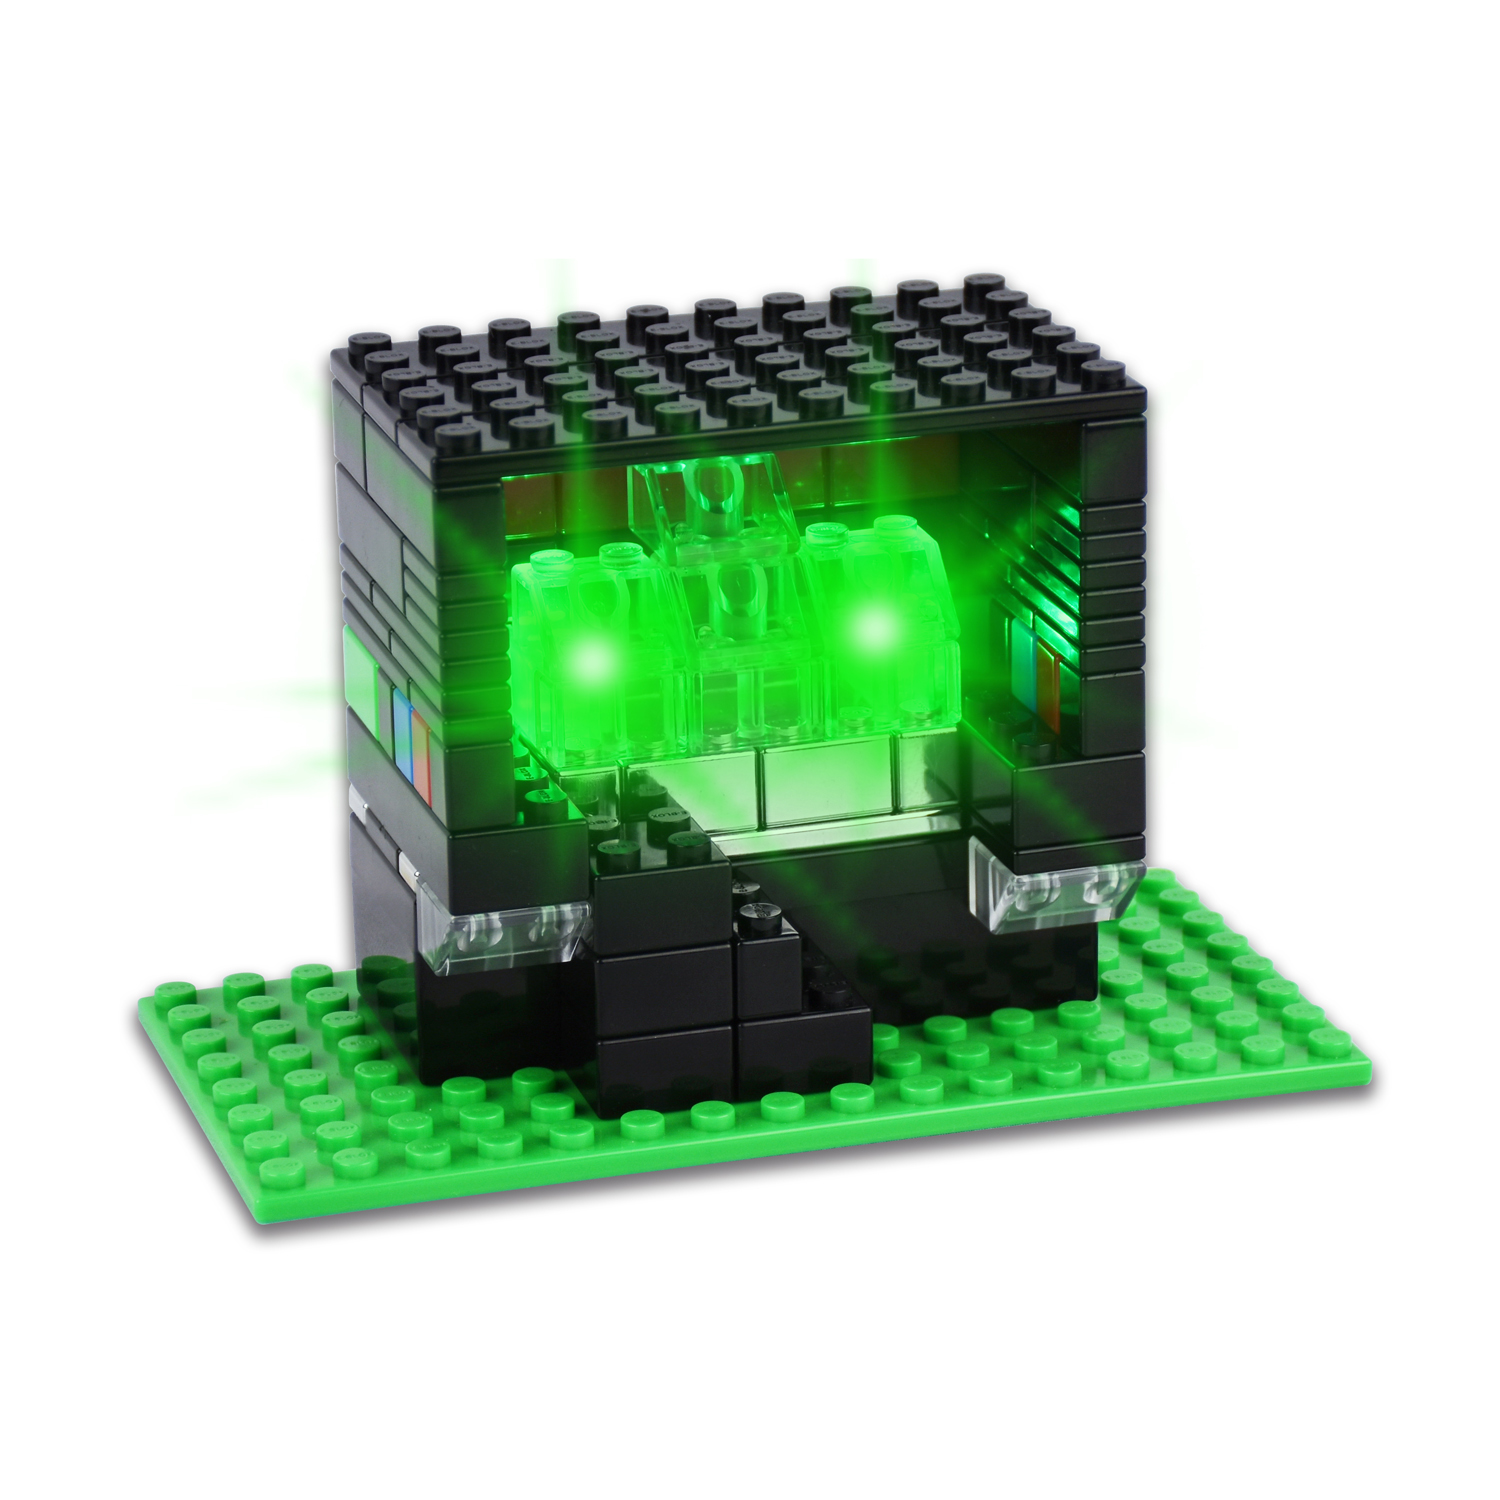 E-Blox Story Blox - The City, Light-Up Building Blocks, 138 Pieces image number null